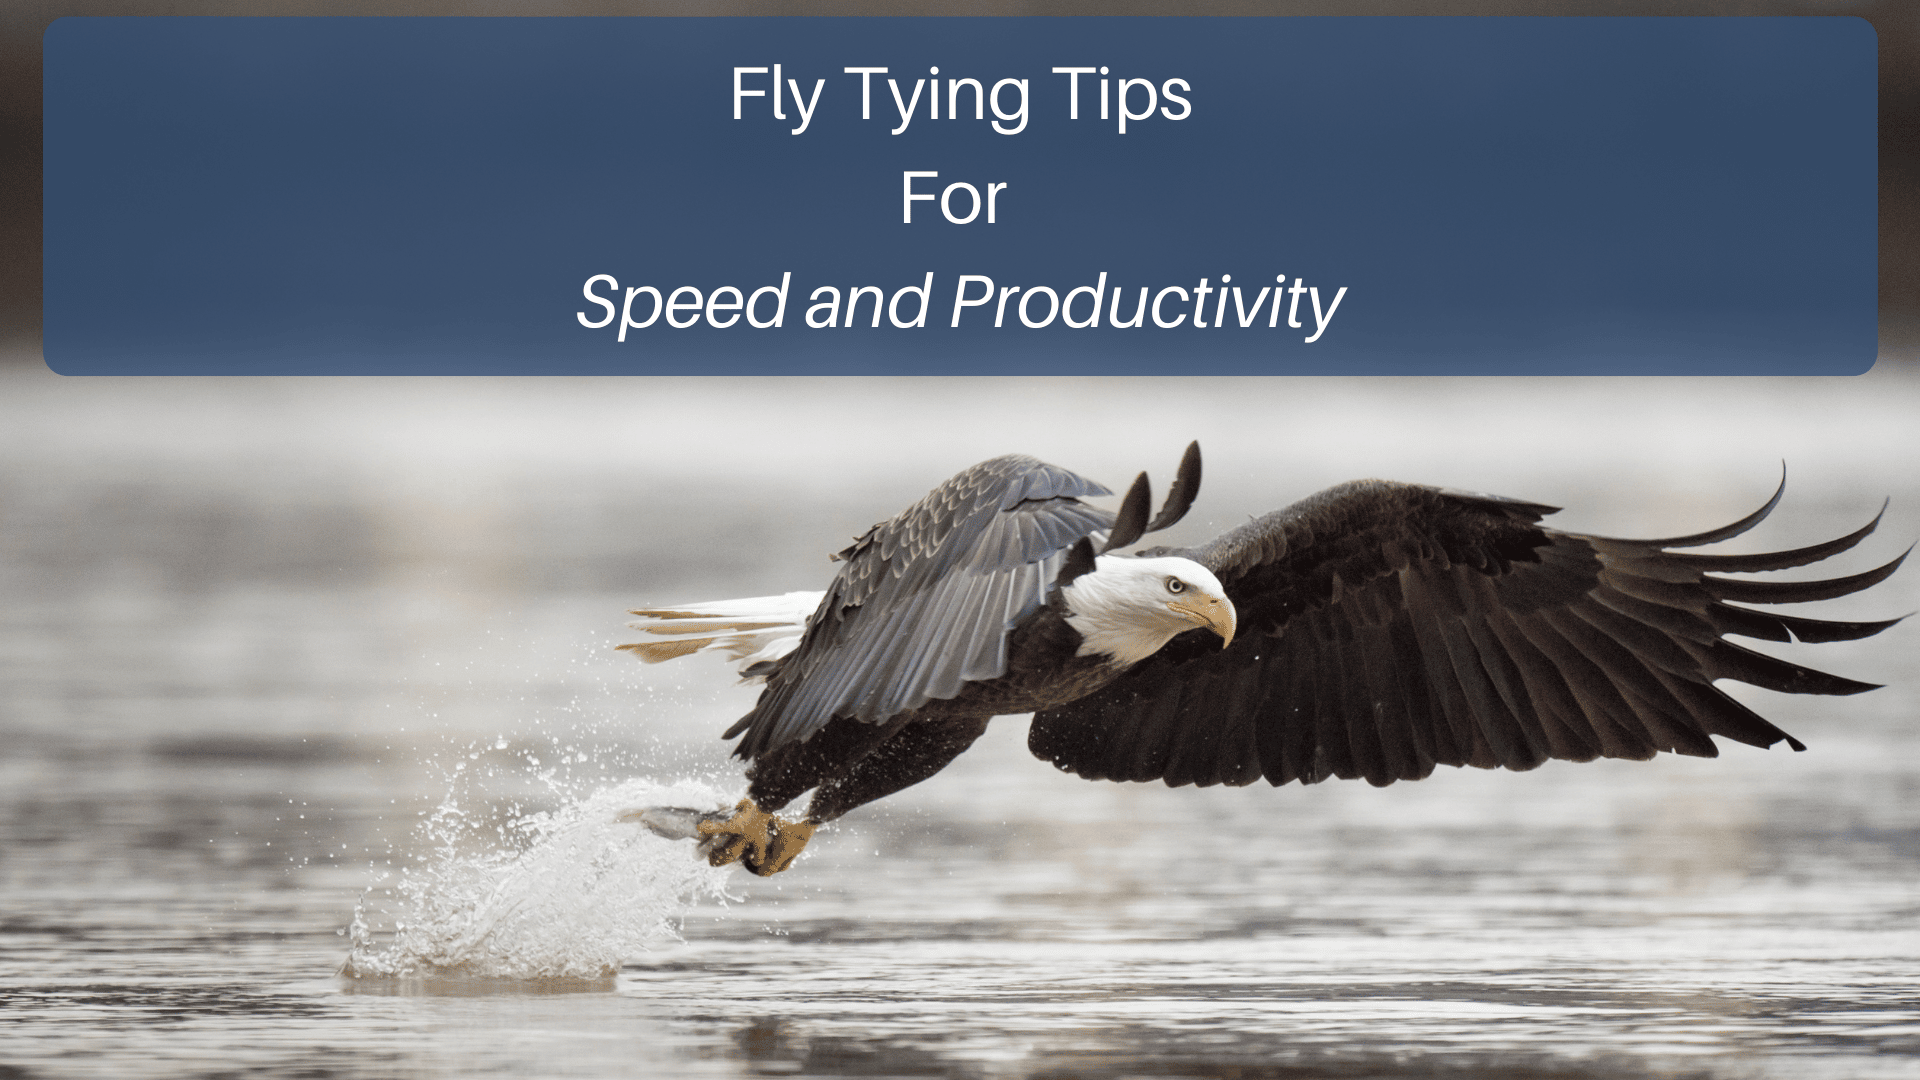 Fly Tying Tips for Speed & Productivity